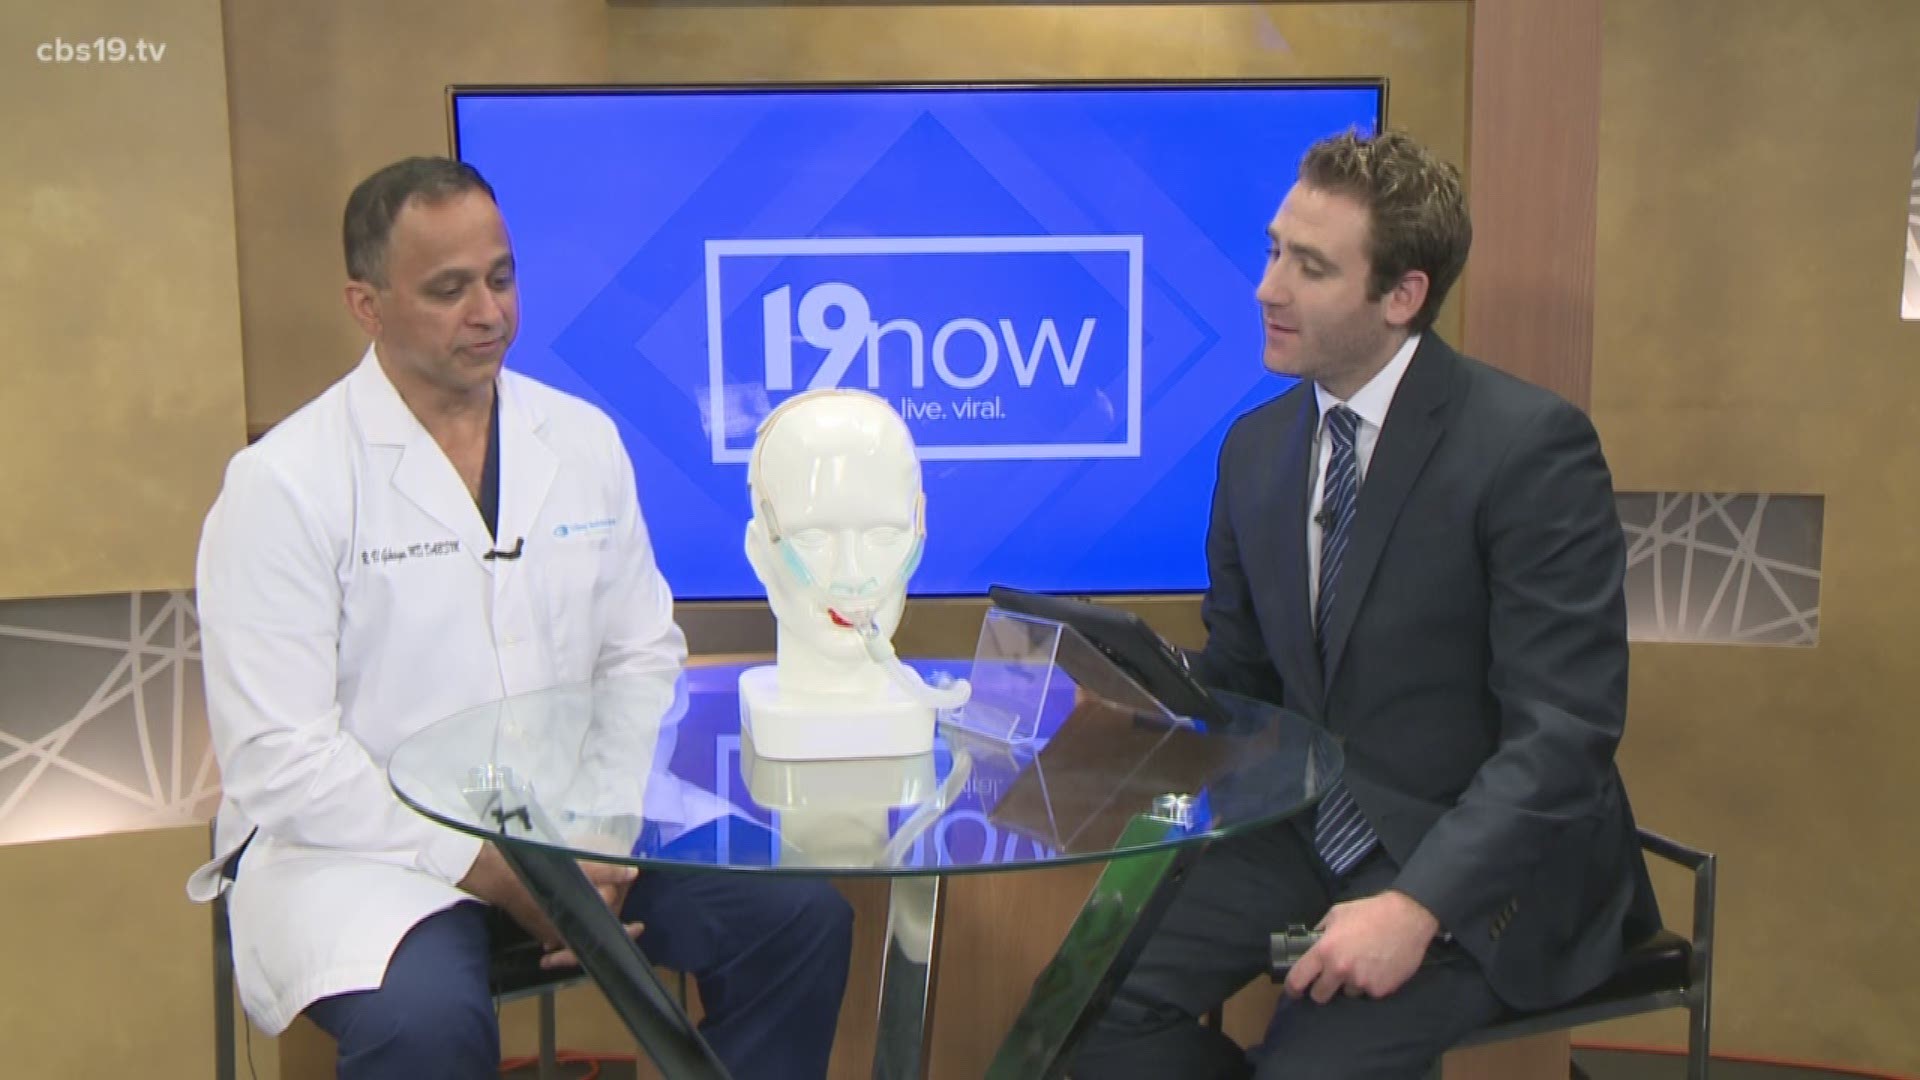 Dr. Raghavendra Ghuge of the Sleep Medicine Institute of Texas, chats with Mike about ways to improve sleep.